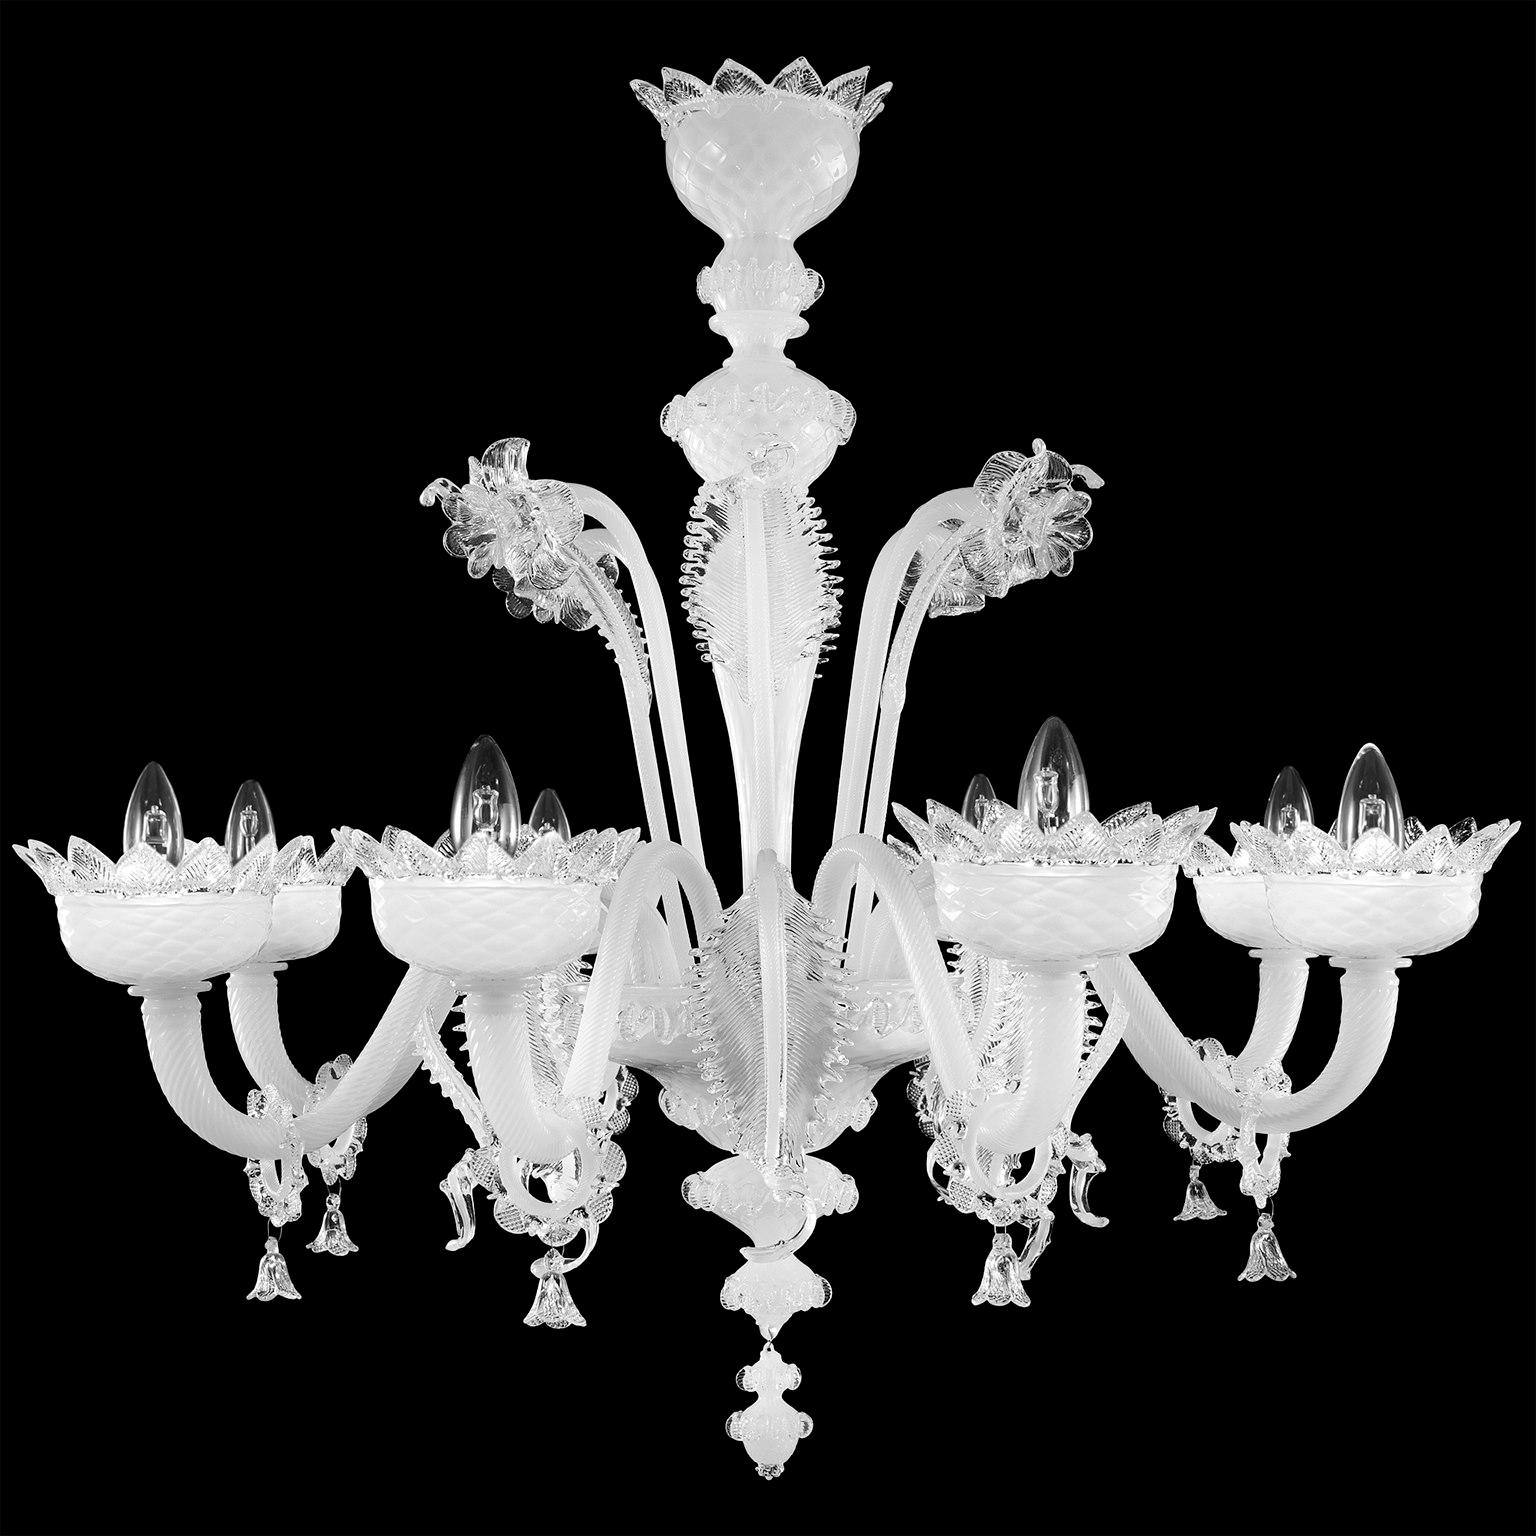 Classic chandelier 8 arms white silk Murano glass crystal details by Multiforme.
The classic Murano glass chandelier, as it is in the collective imagination. As many other chandeliers in our collections, V-Classic 800 is designed with attention to